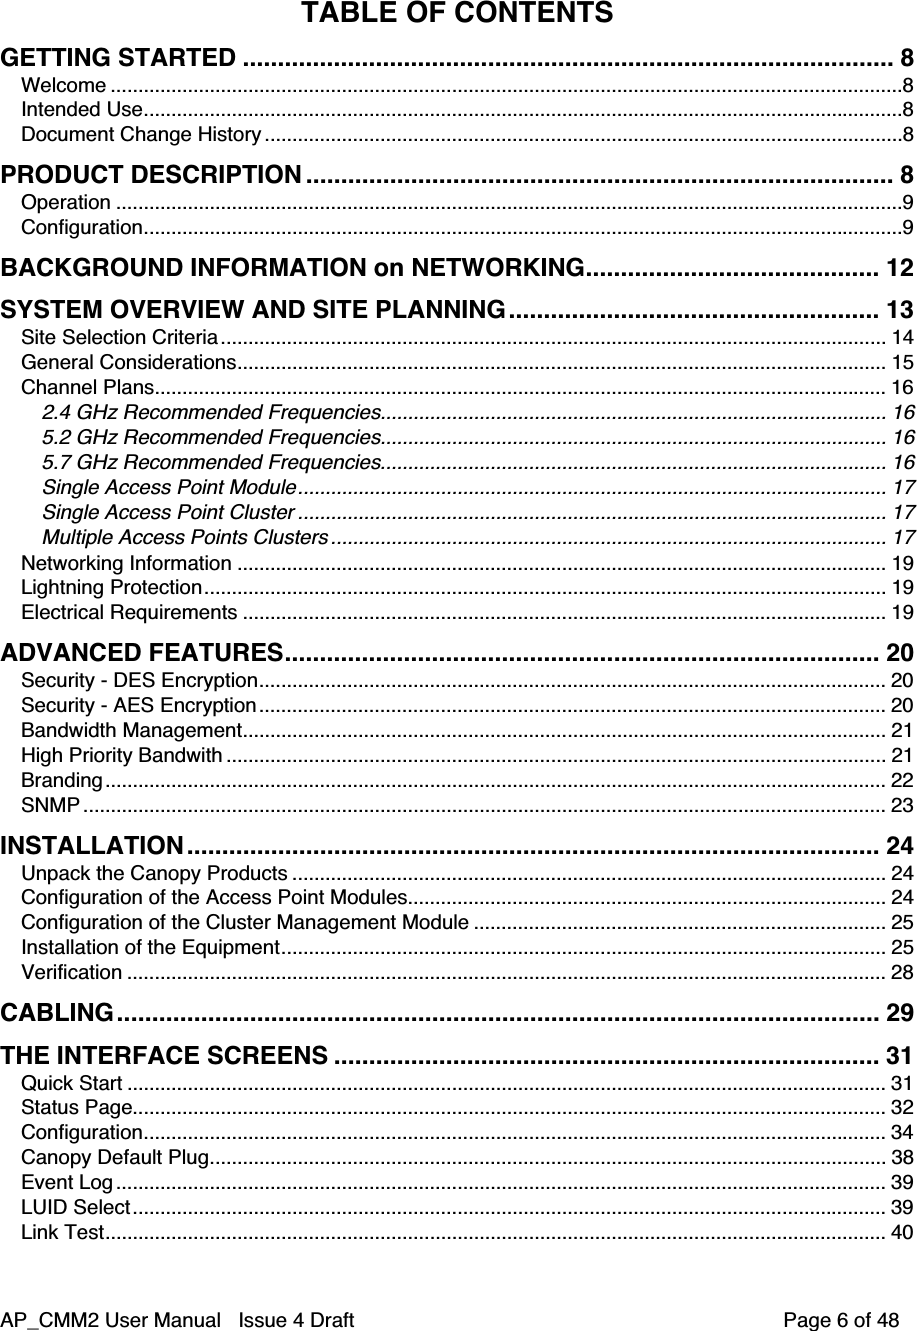 AP_CMM2 User Manual   Issue 4 Draft         Page 6 of 48TABLE OF CONTENTSGETTING STARTED ............................................................................................. 8Welcome ................................................................................................................................................8Intended Use..........................................................................................................................................8Document Change History ....................................................................................................................8PRODUCT DESCRIPTION .................................................................................... 8Operation ...............................................................................................................................................9Configuration..........................................................................................................................................9BACKGROUND INFORMATION on NETWORKING.......................................... 12SYSTEM OVERVIEW AND SITE PLANNING..................................................... 13Site Selection Criteria......................................................................................................................... 14General Considerations...................................................................................................................... 15Channel Plans..................................................................................................................................... 162.4 GHz Recommended Frequencies............................................................................................ 165.2 GHz Recommended Frequencies............................................................................................ 165.7 GHz Recommended Frequencies............................................................................................ 16Single Access Point Module........................................................................................................... 17Single Access Point Cluster ........................................................................................................... 17Multiple Access Points Clusters ..................................................................................................... 17Networking Information ...................................................................................................................... 19Lightning Protection............................................................................................................................ 19Electrical Requirements ..................................................................................................................... 19ADVANCED FEATURES..................................................................................... 20Security - DES Encryption.................................................................................................................. 20Security - AES Encryption.................................................................................................................. 20Bandwidth Management..................................................................................................................... 21High Priority Bandwith ........................................................................................................................ 21Branding.............................................................................................................................................. 22SNMP .................................................................................................................................................. 23INSTALLATION ................................................................................................... 24Unpack the Canopy Products ............................................................................................................ 24Configuration of the Access Point Modules....................................................................................... 24Configuration of the Cluster Management Module ........................................................................... 25Installation of the Equipment.............................................................................................................. 25Verification .......................................................................................................................................... 28CABLING............................................................................................................. 29THE INTERFACE SCREENS .............................................................................. 31Quick Start .......................................................................................................................................... 31Status Page......................................................................................................................................... 32Configuration....................................................................................................................................... 34Canopy Default Plug........................................................................................................................... 38Event Log ............................................................................................................................................ 39LUID Select......................................................................................................................................... 39Link Test.............................................................................................................................................. 40